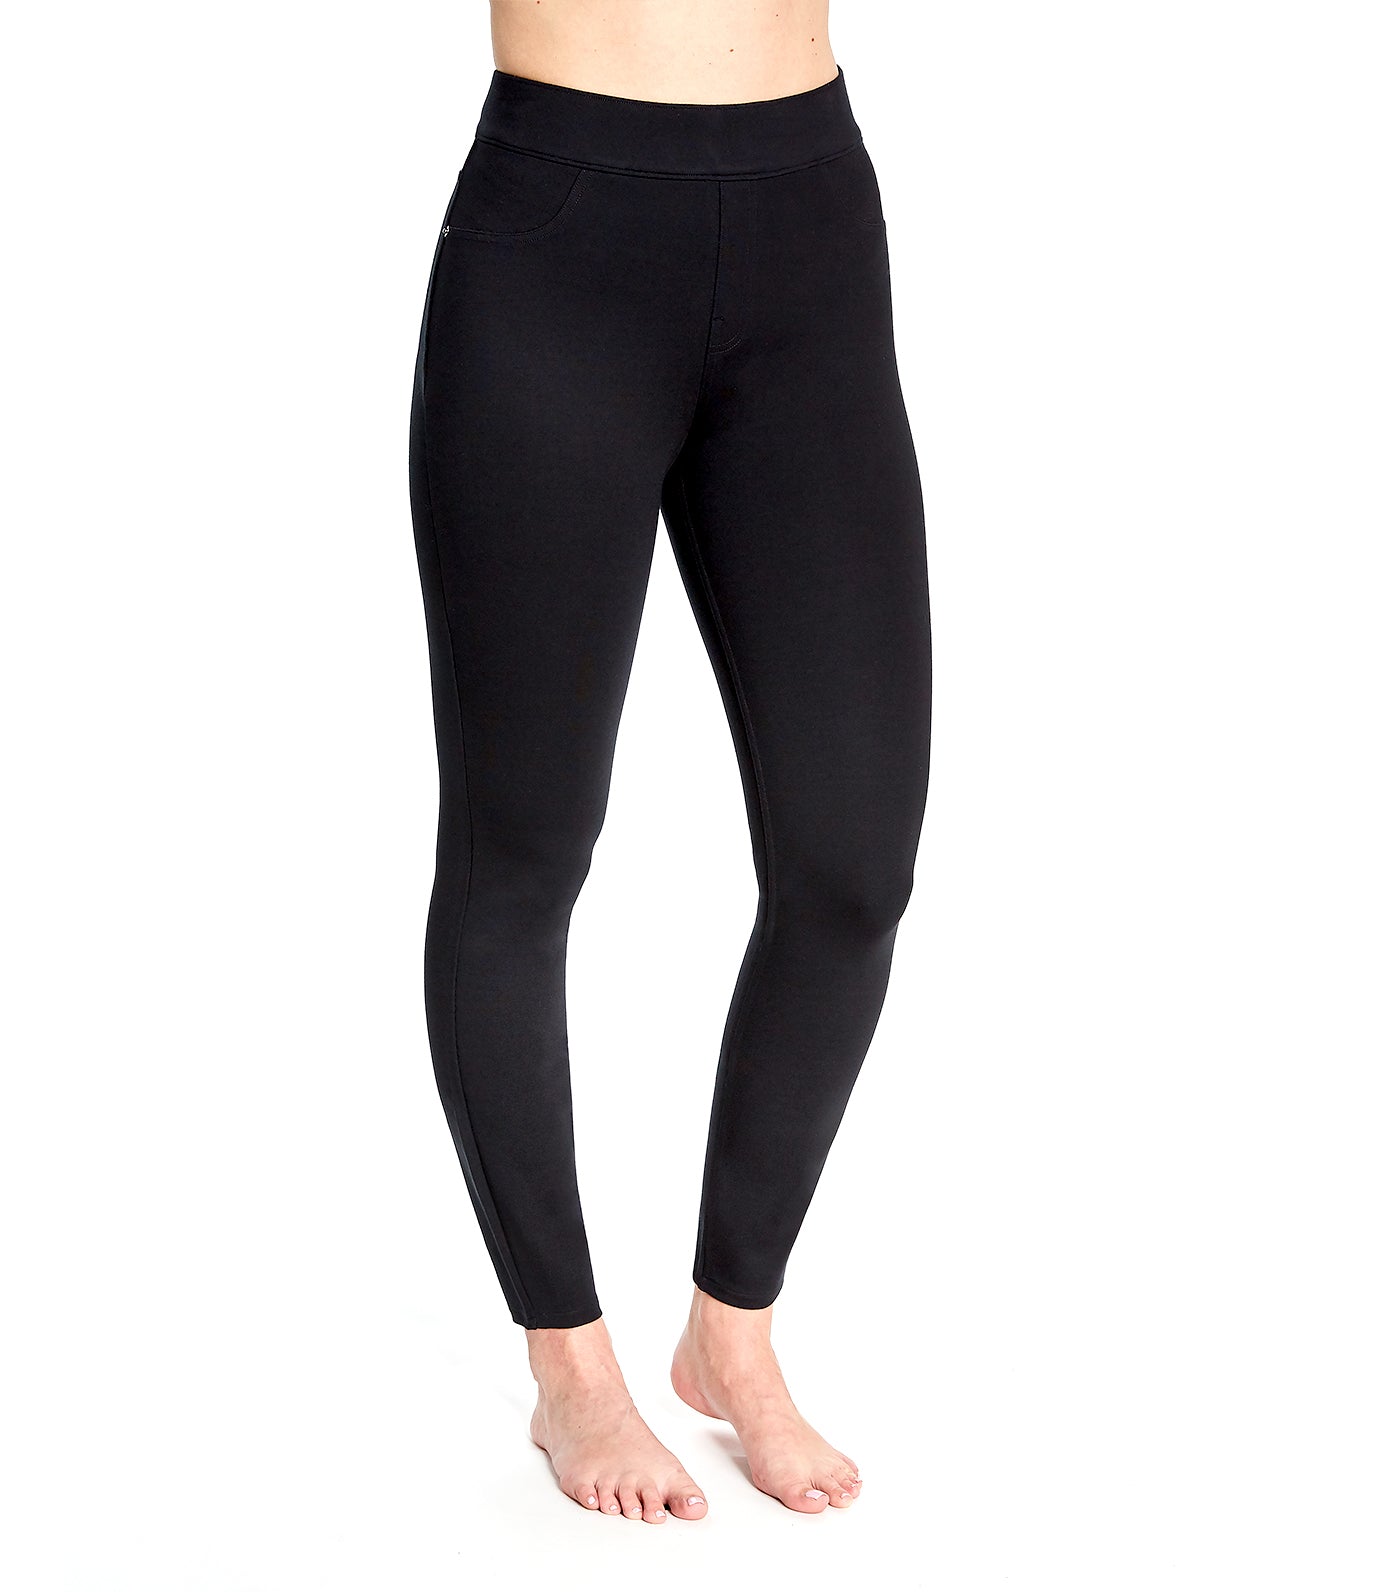 Rustan's - Put an edgy twist to the original SPANX with these faux leather  moto leggings available at Rustan's.